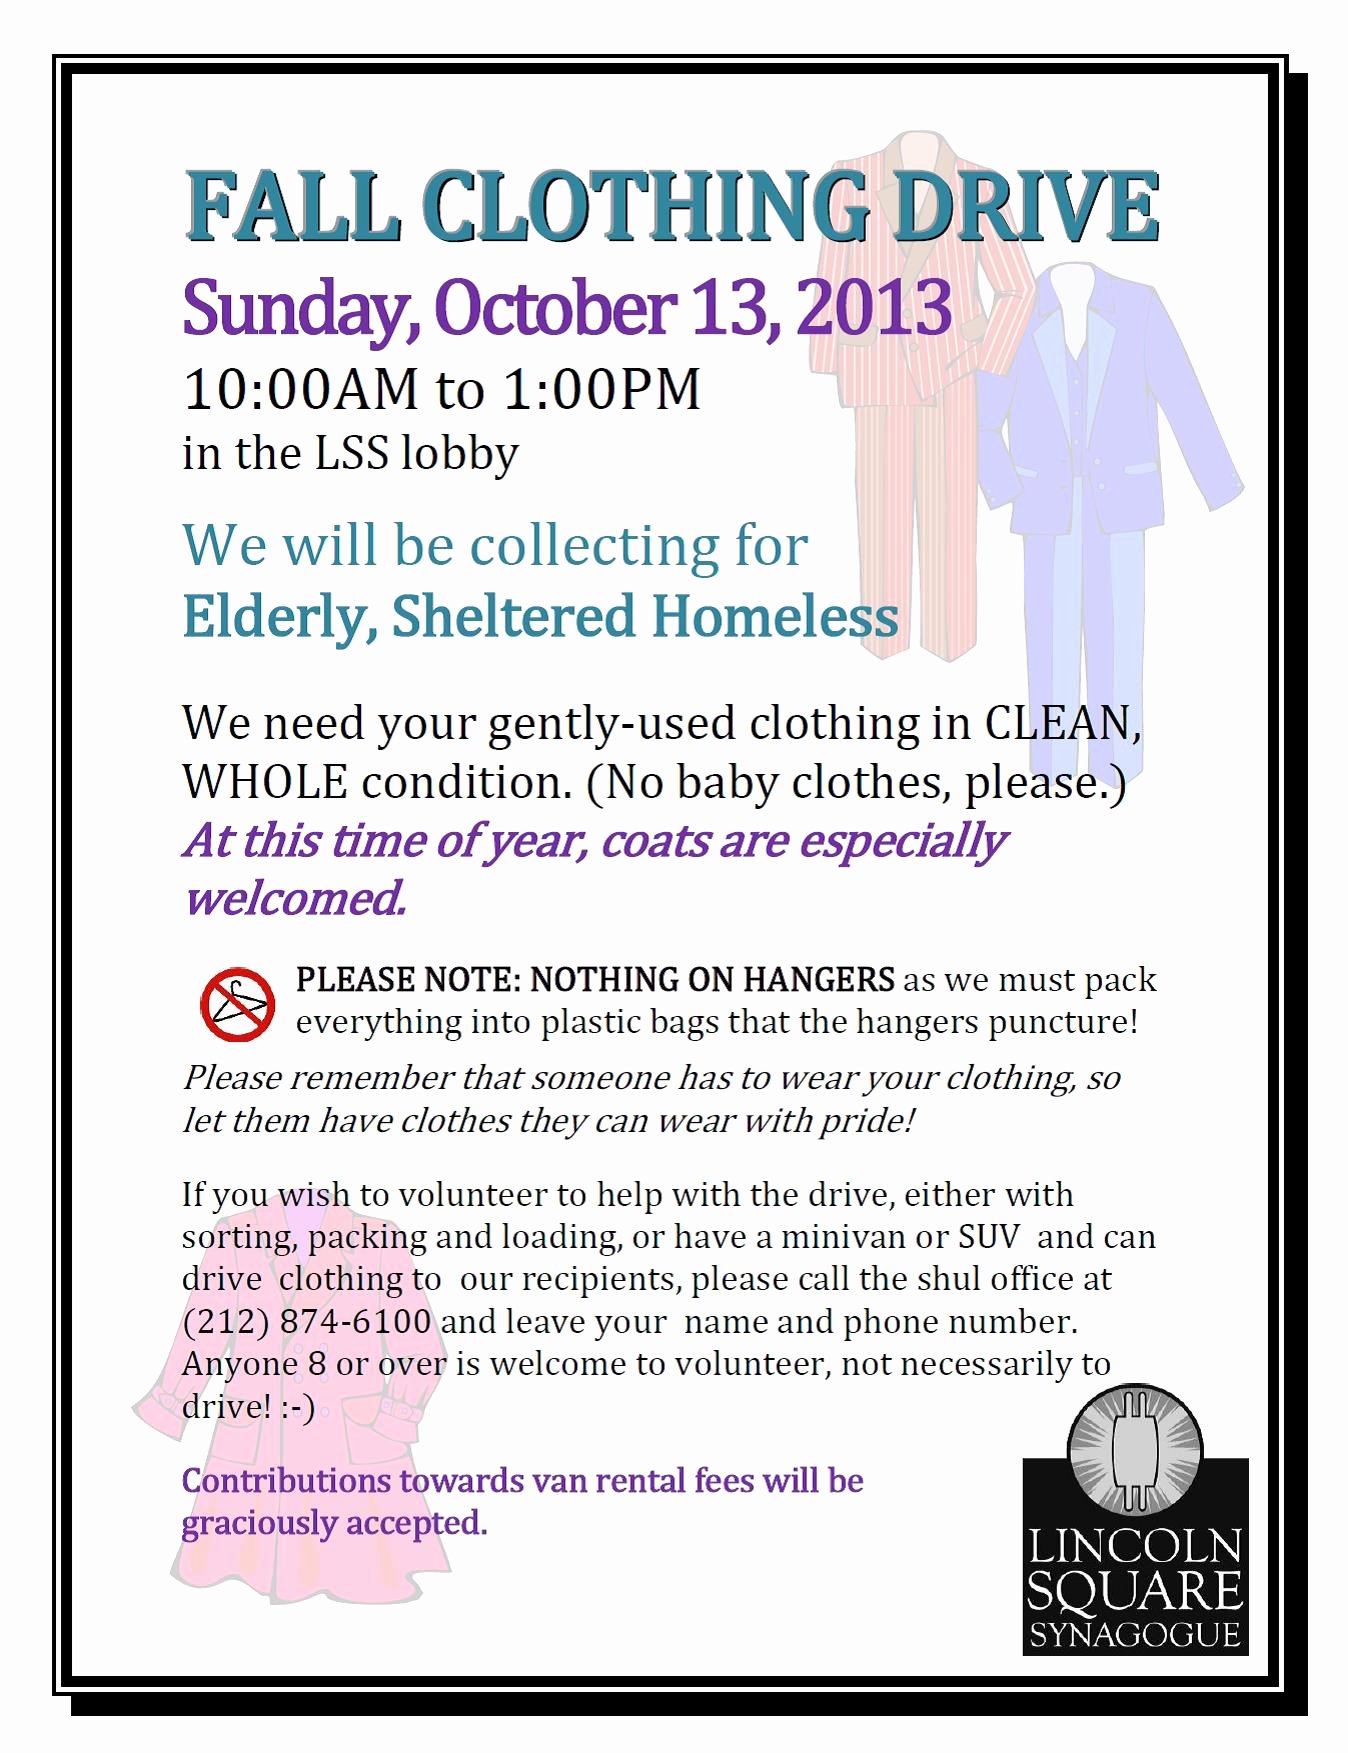 Clothing Drive Flyer Template Elegant Fall Clothing Drive event Lincoln Square Synagogue